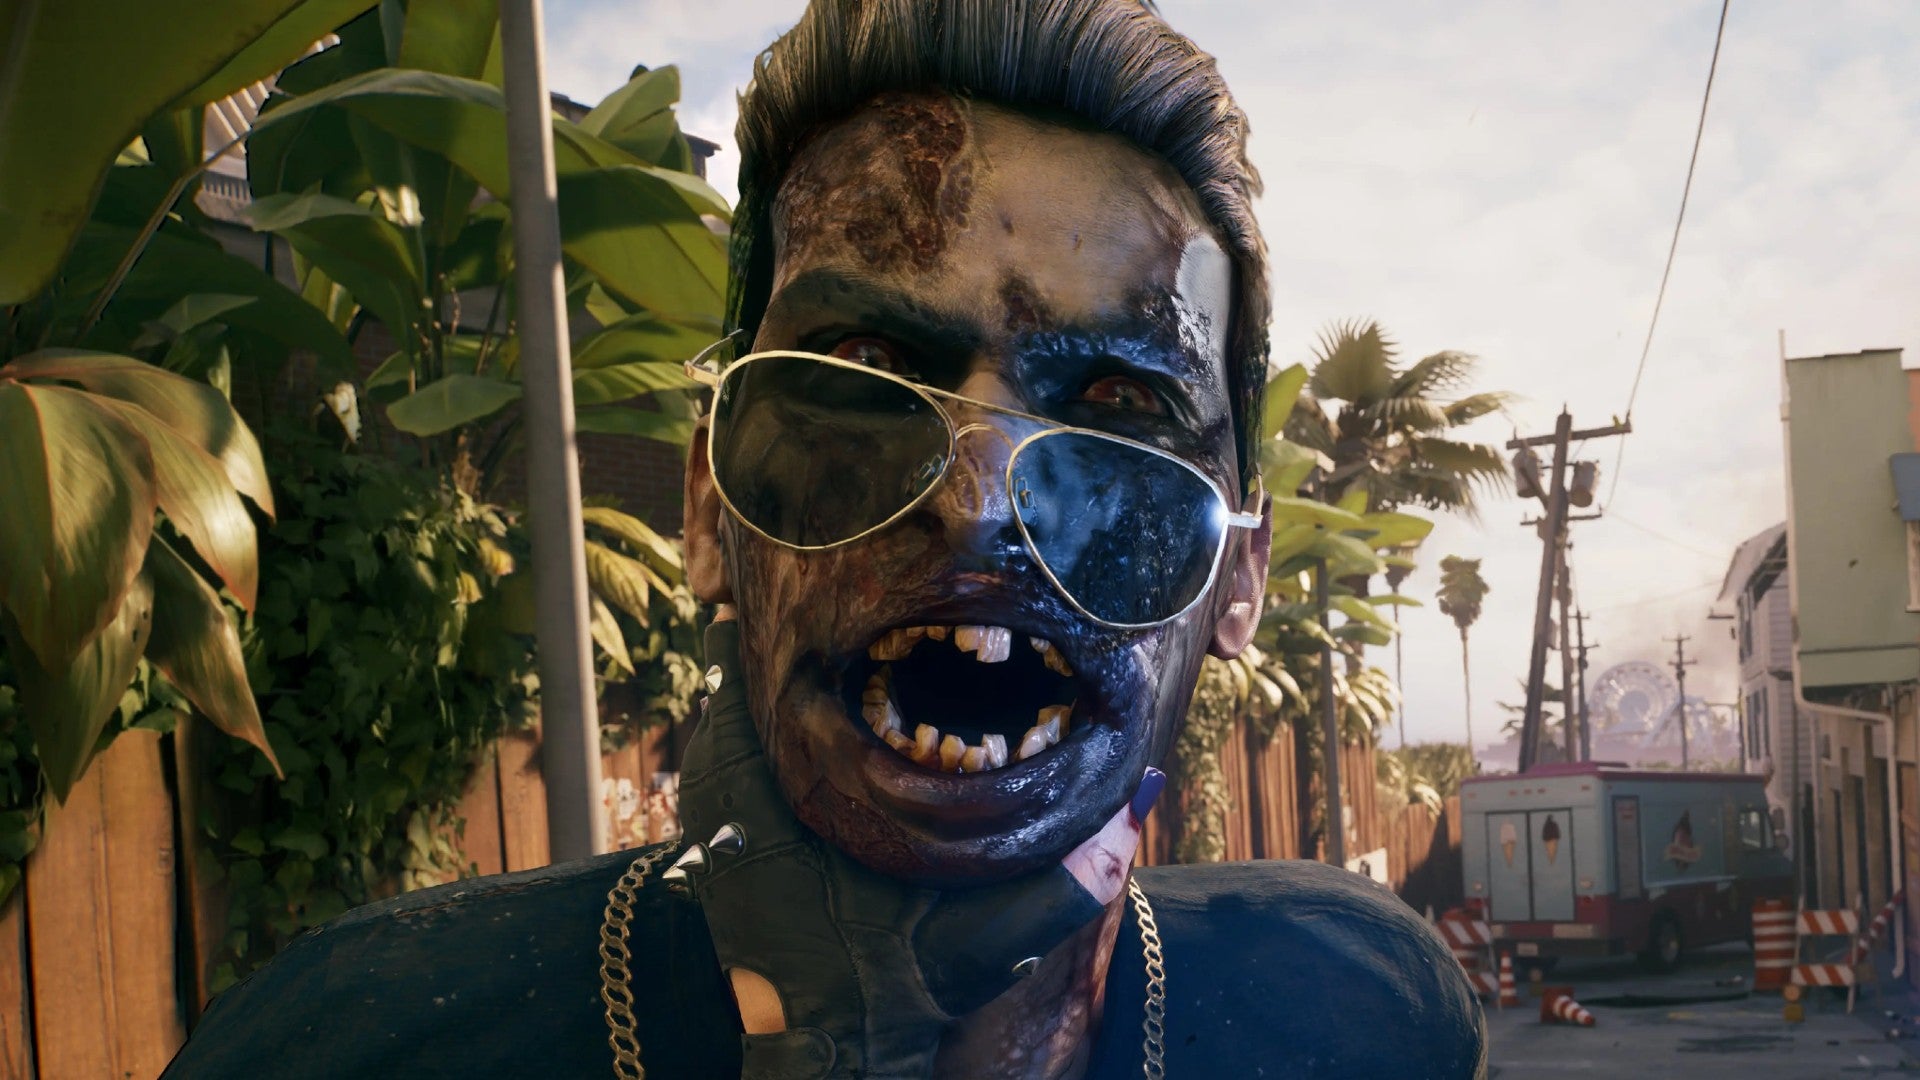 Dead Island 2 image showing a close up of a zombie wearing sunglasses. Their mouth is open, revealing a set of jagged, broken teeth.